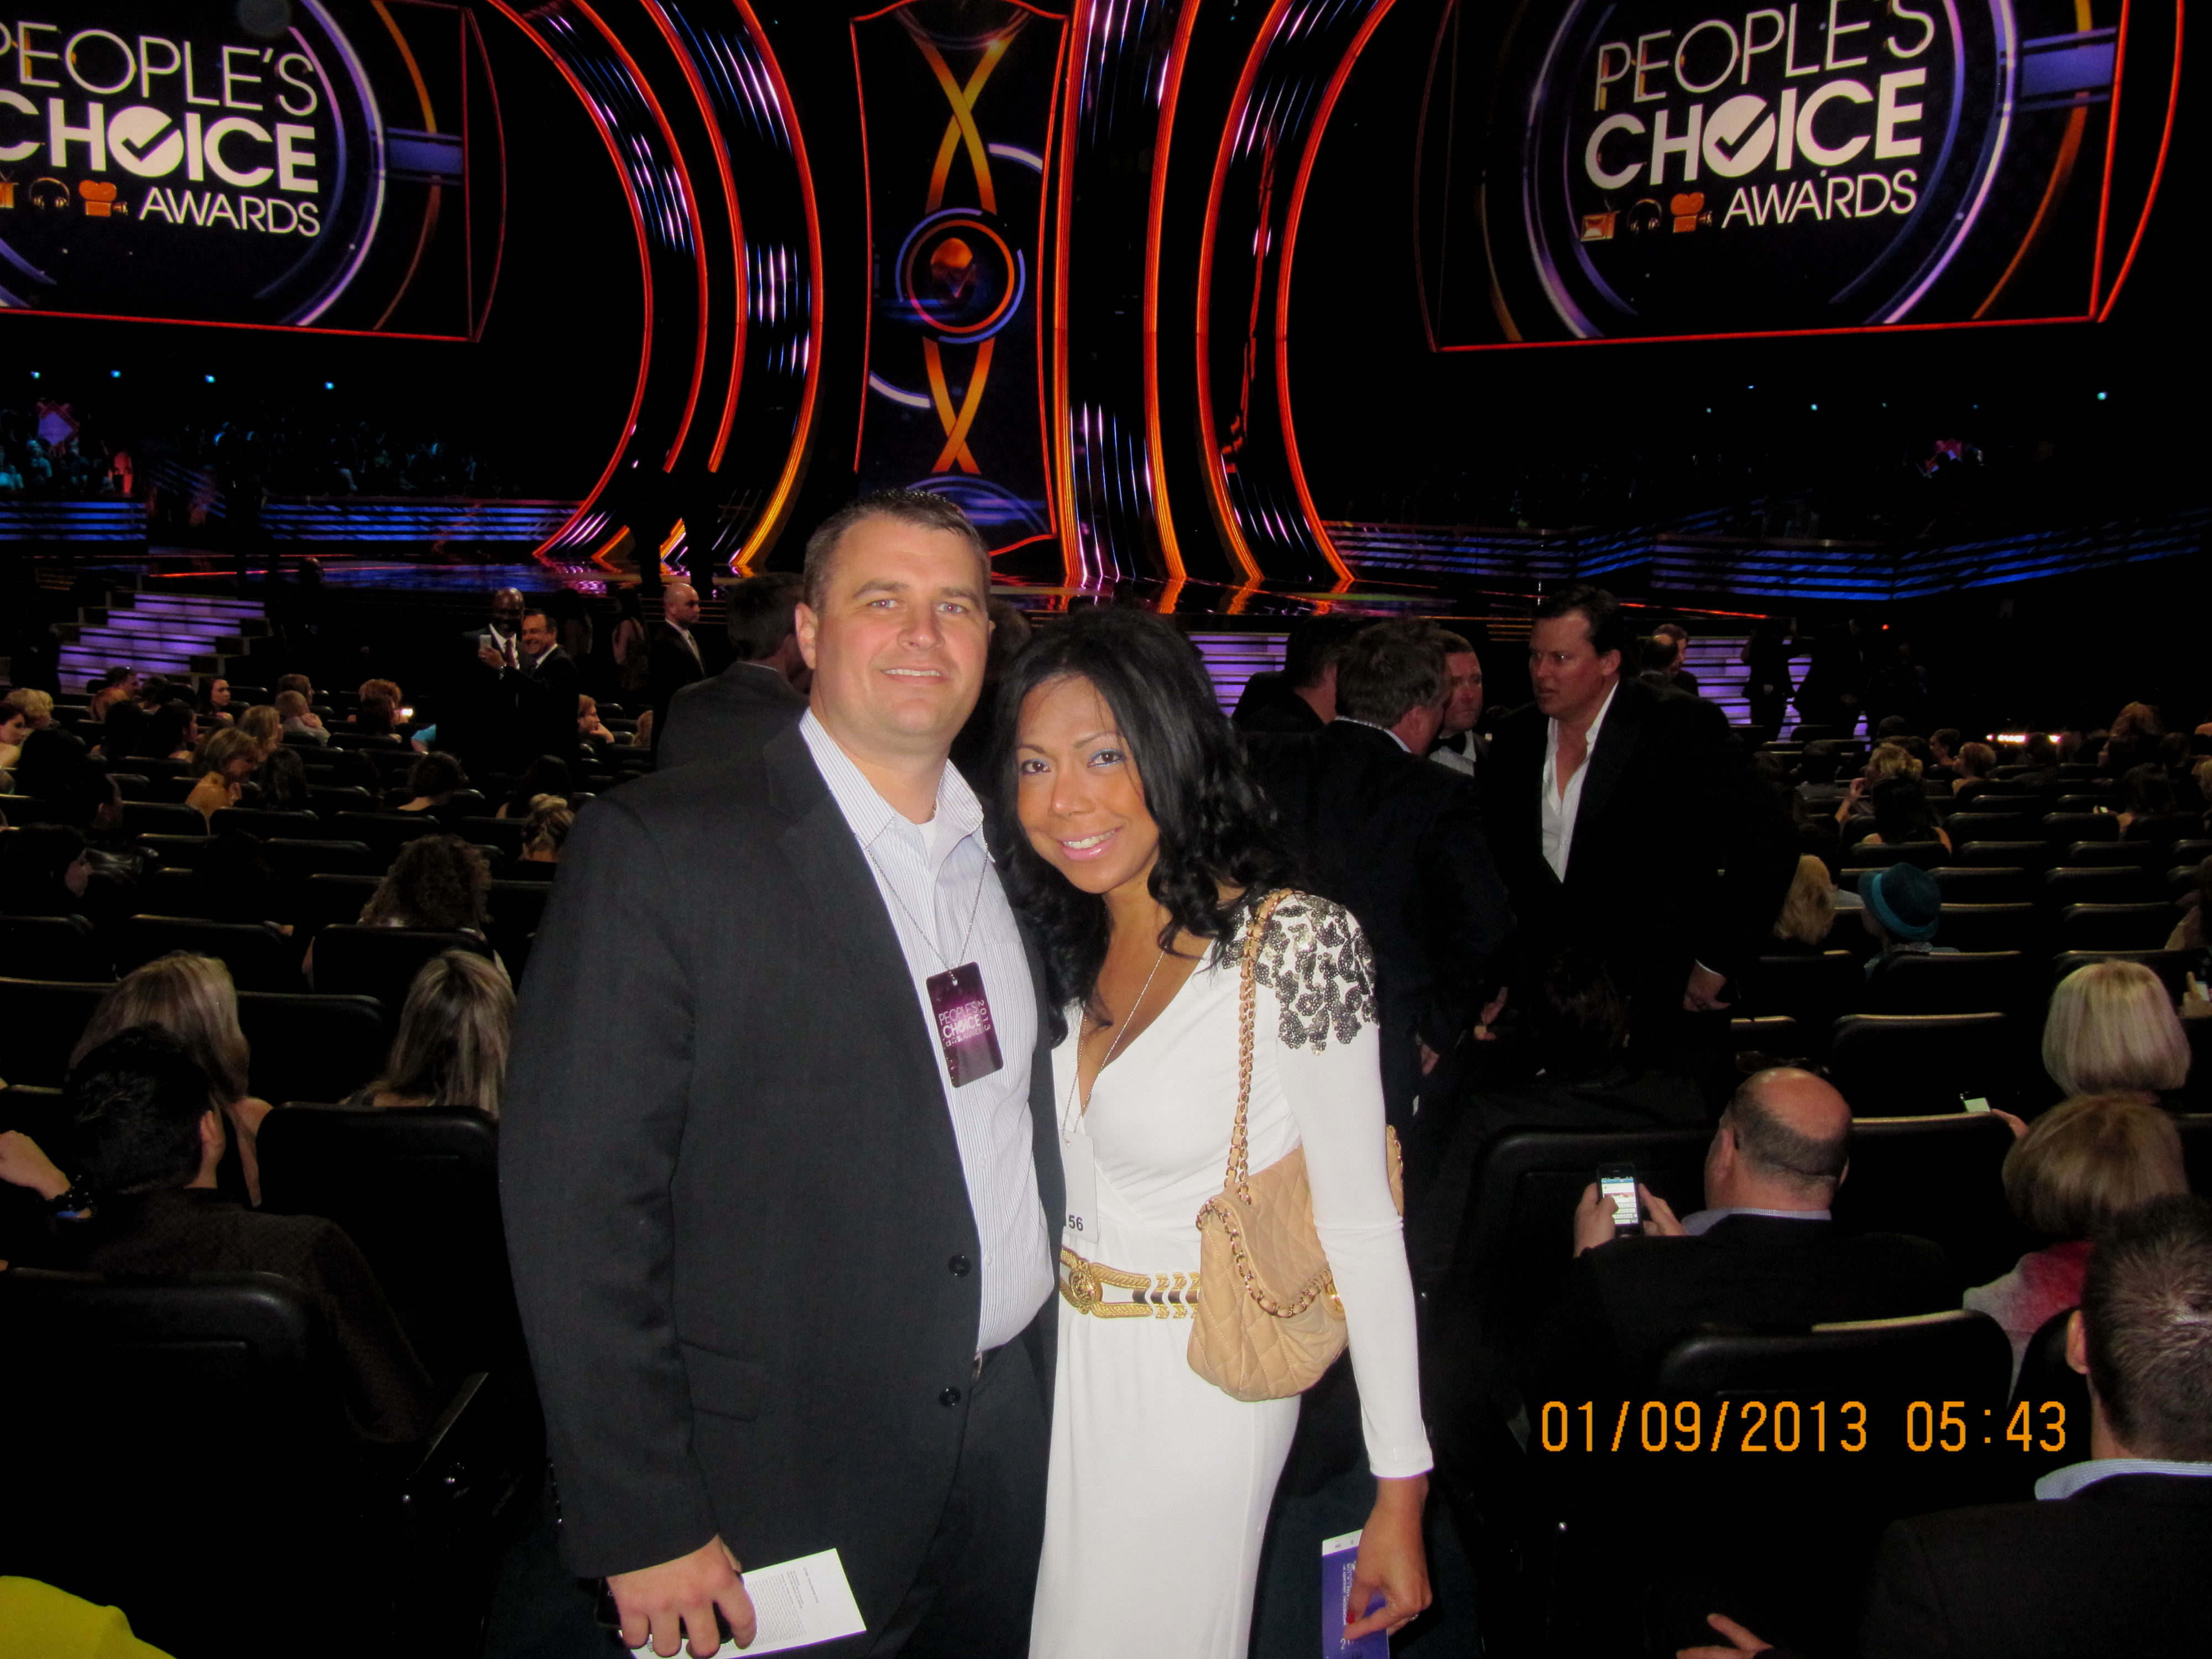 2013 People's Choice Awards at Nokia Theater, Los Angeles